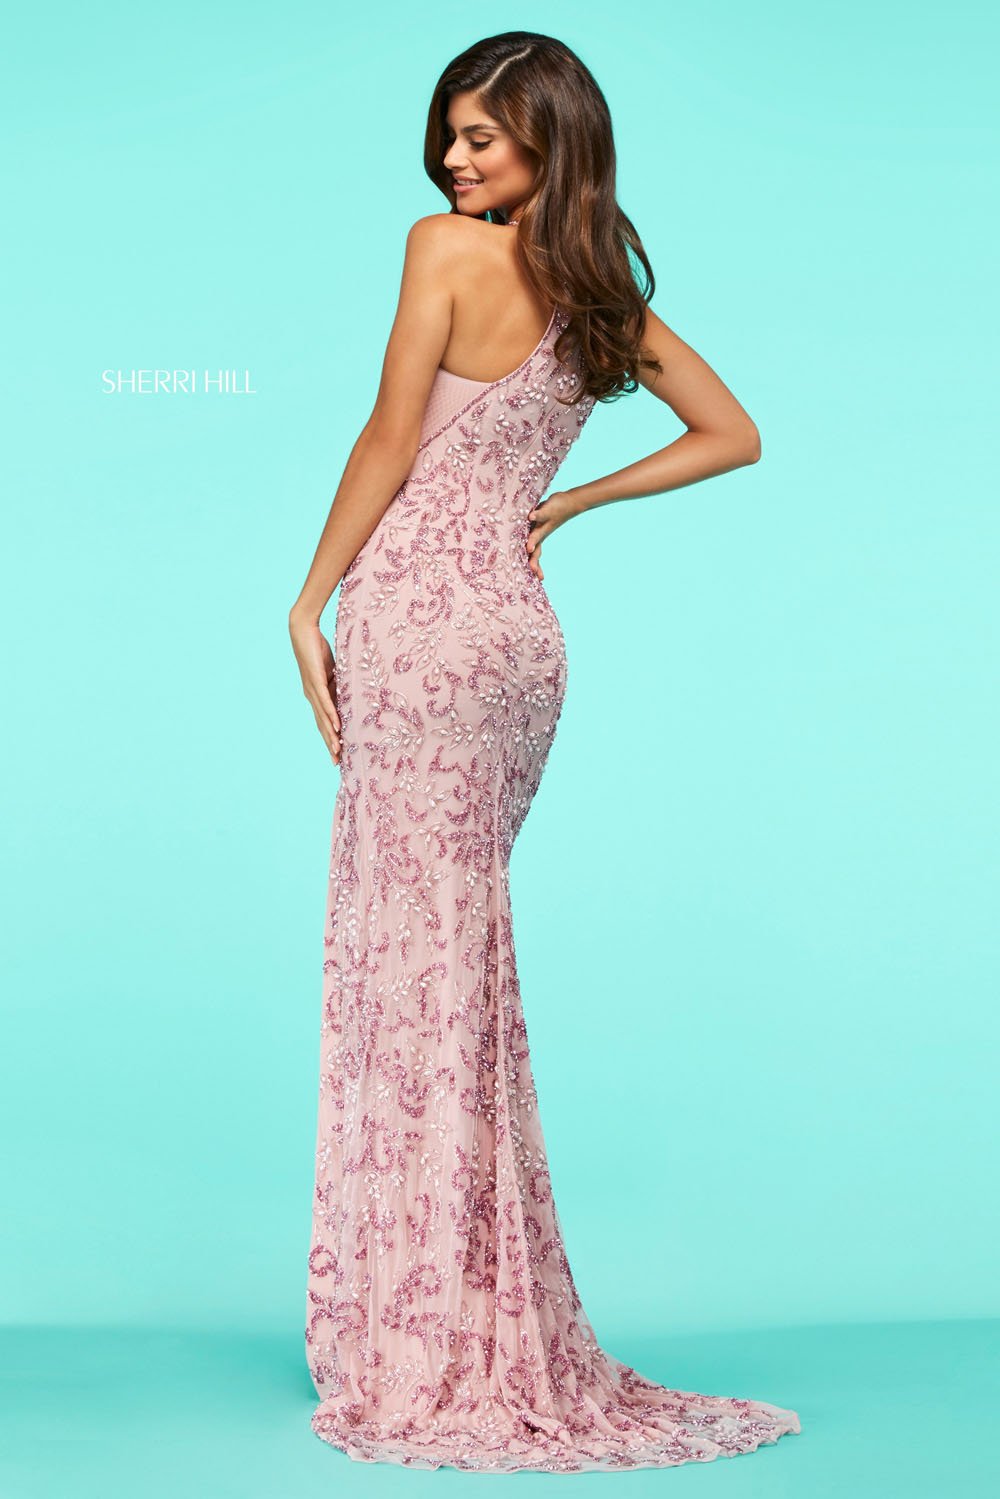 Sherri Hill 53564 dress images in these colors: Pink, Yellow, Light Blue, Nude Ivory, Nude Black.